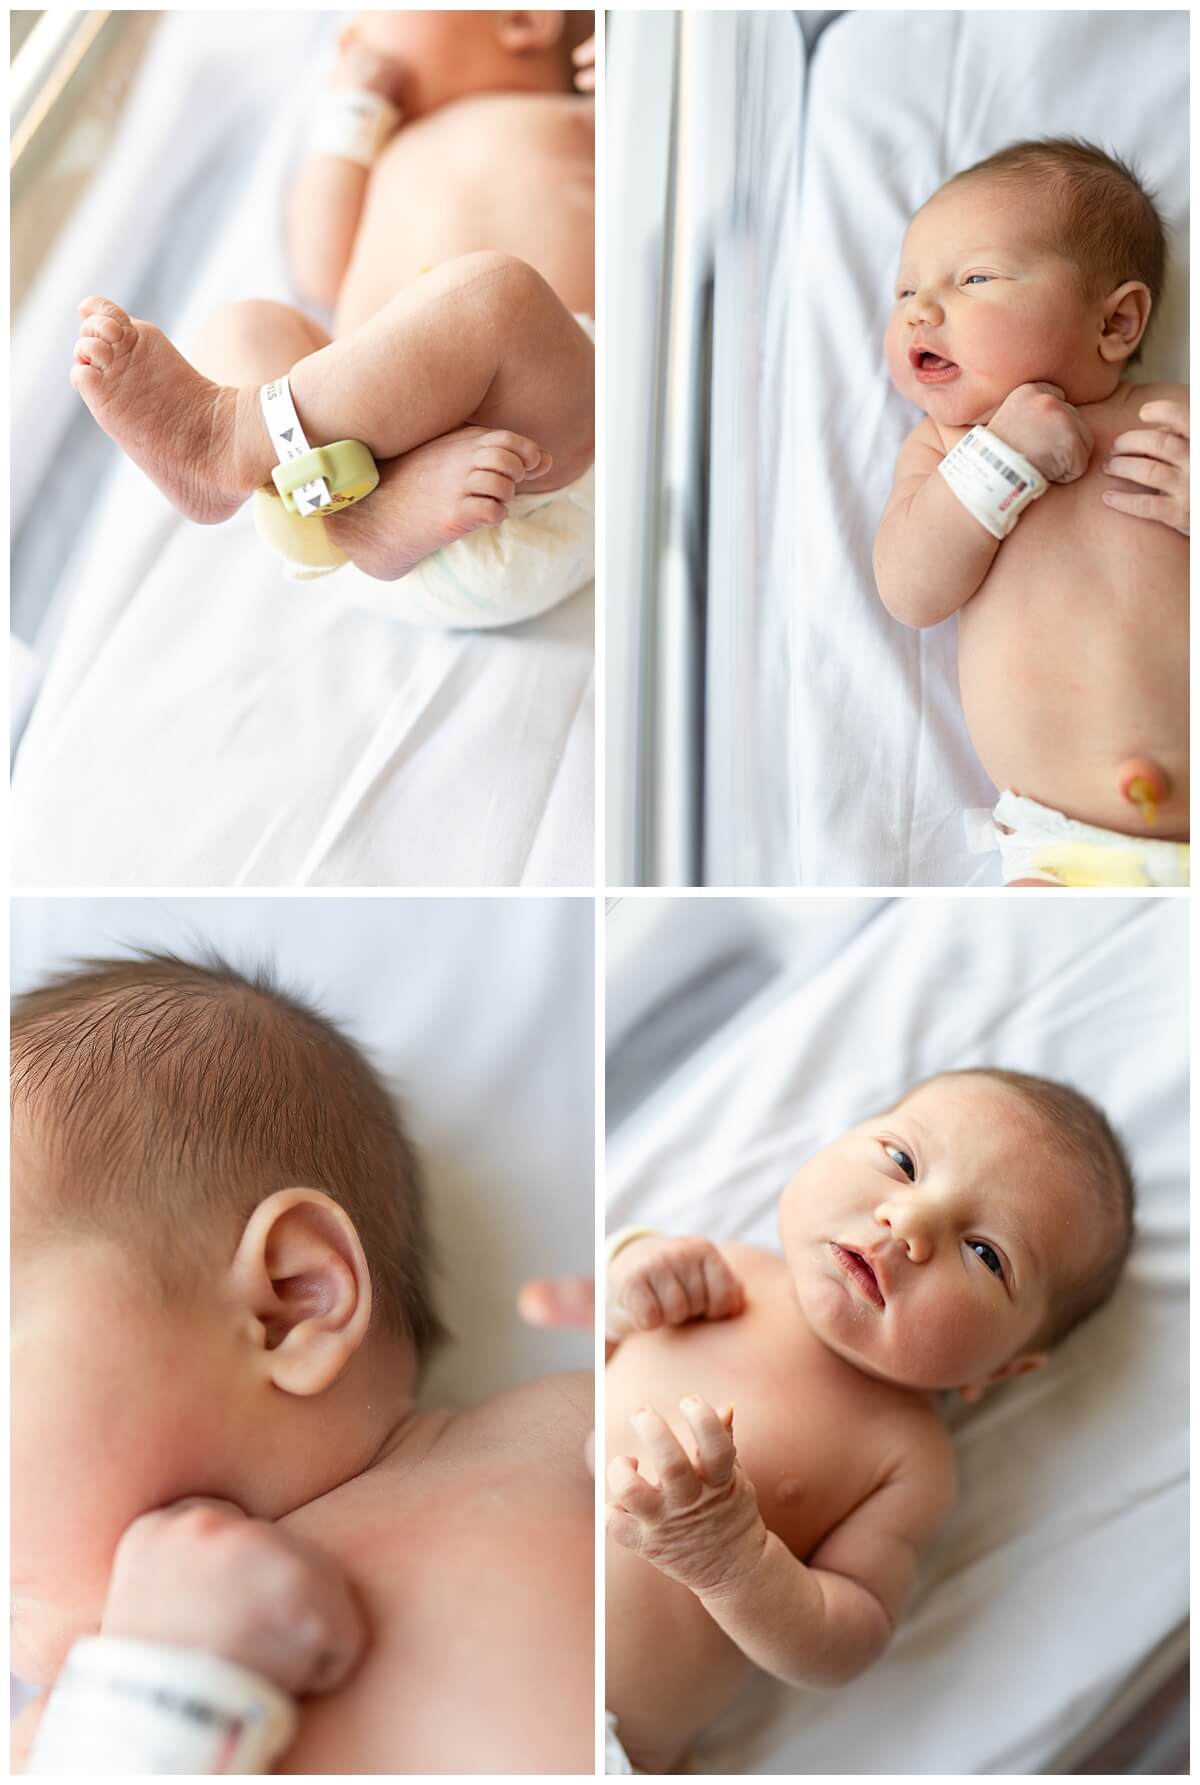 Detail images of a brand new baby in the hospital.